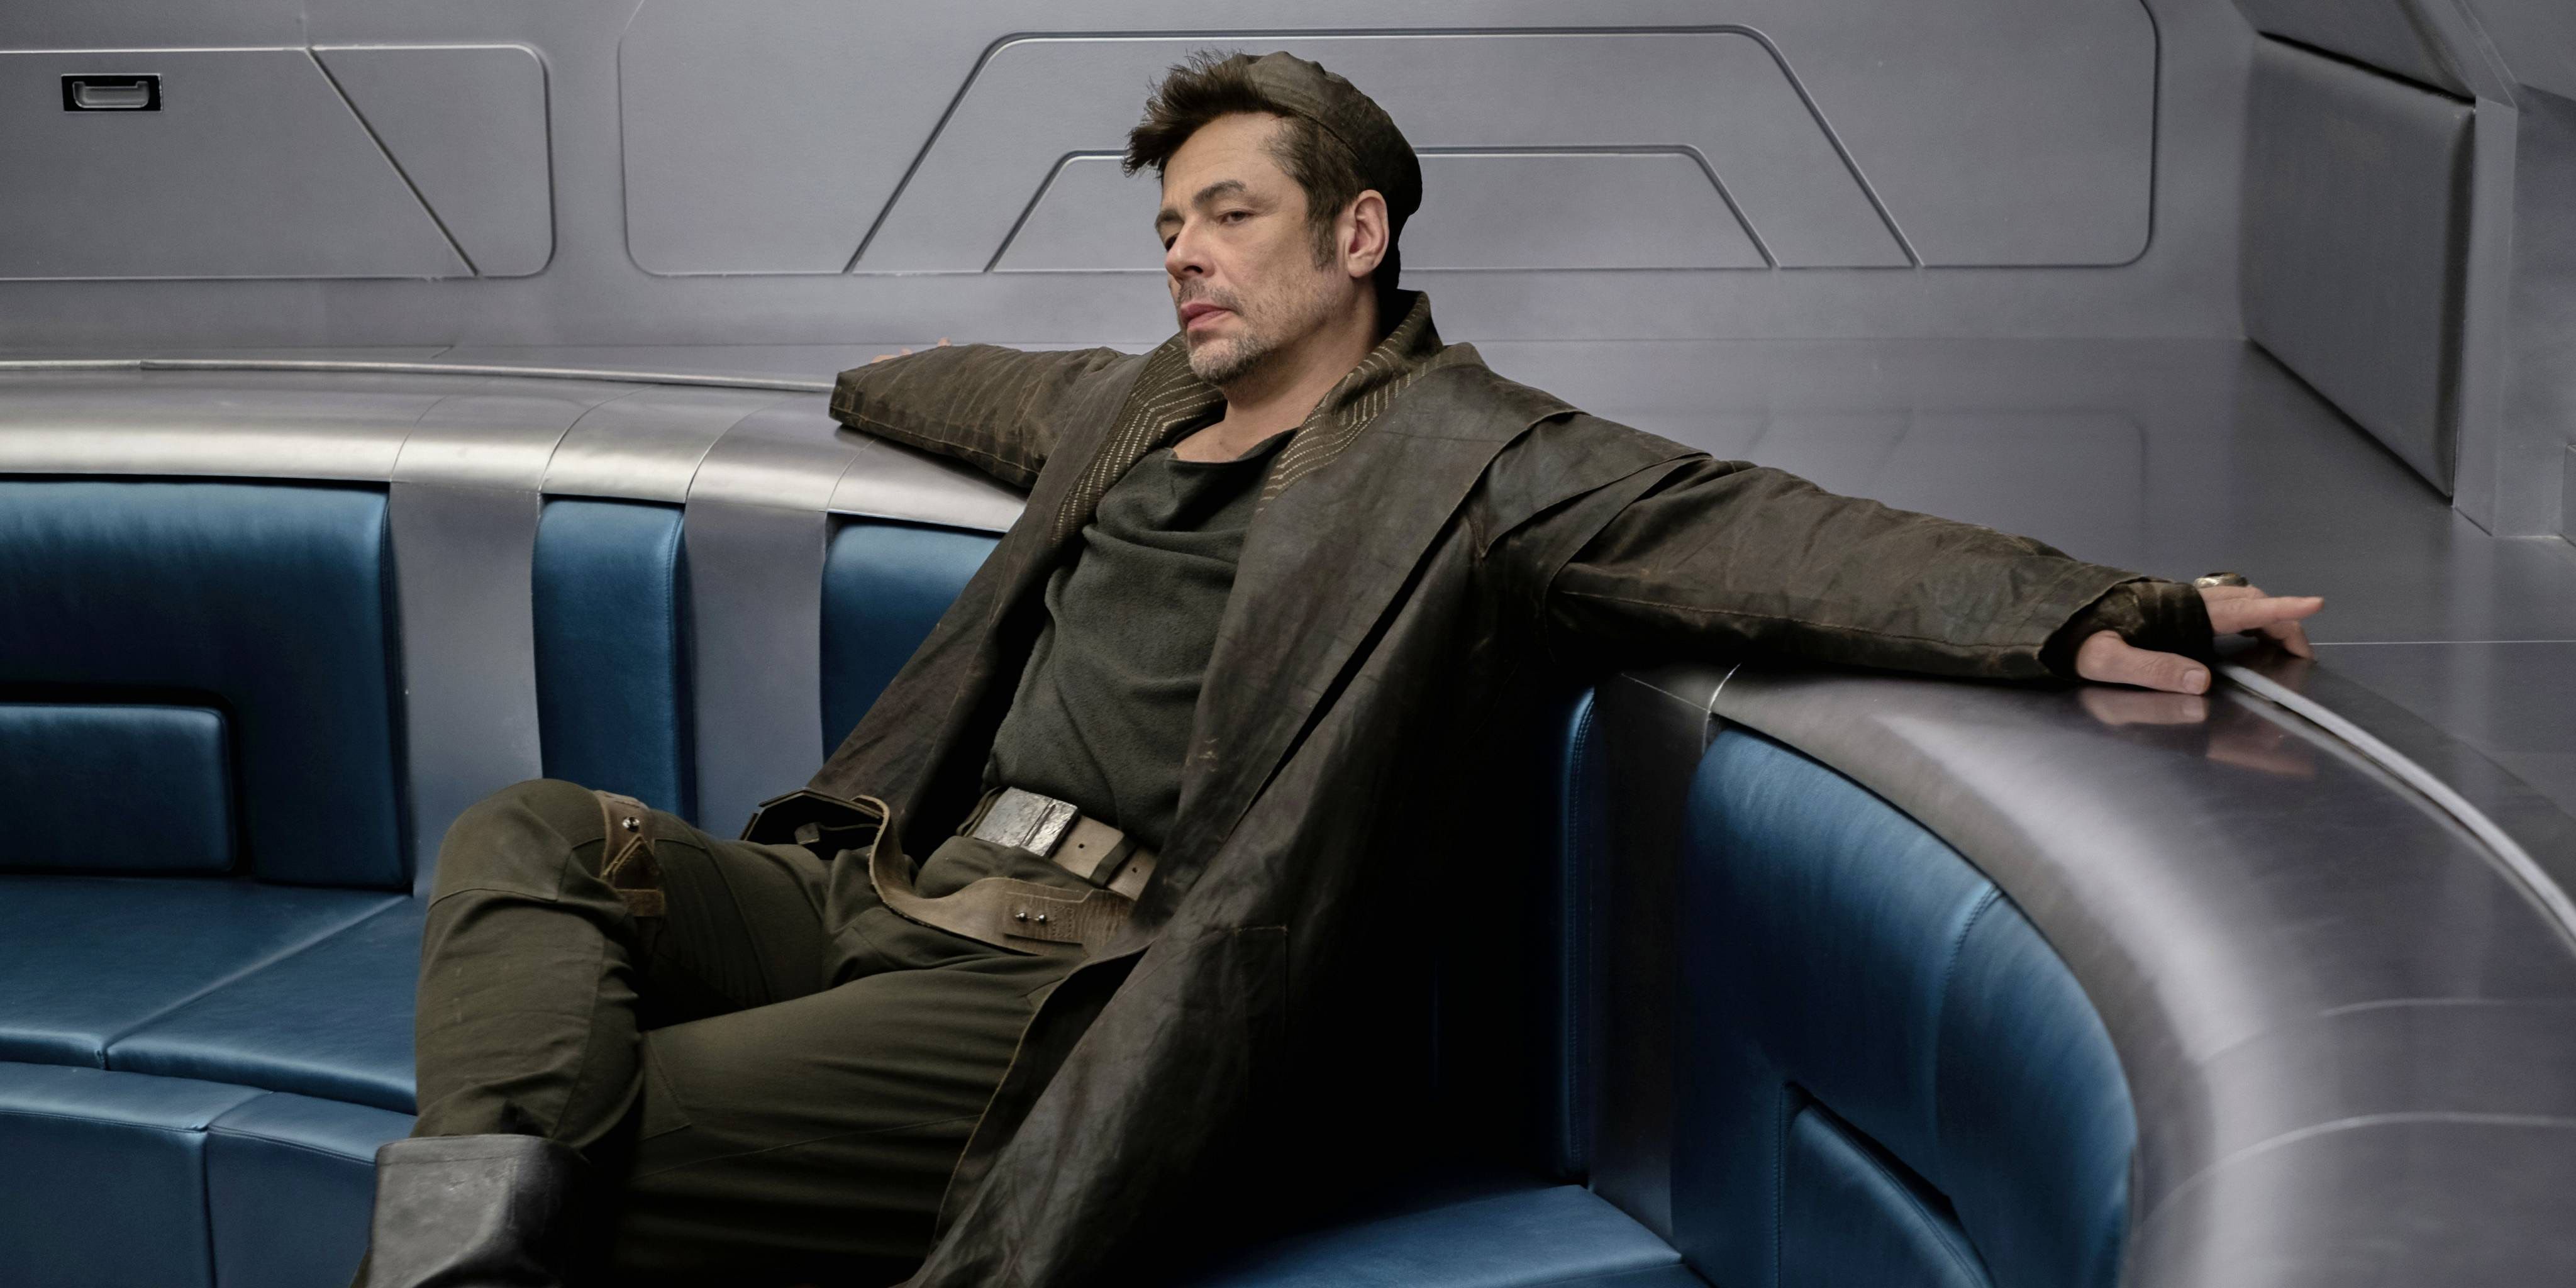 Everything To Know About Benicio Del Toro's Star Wars Character